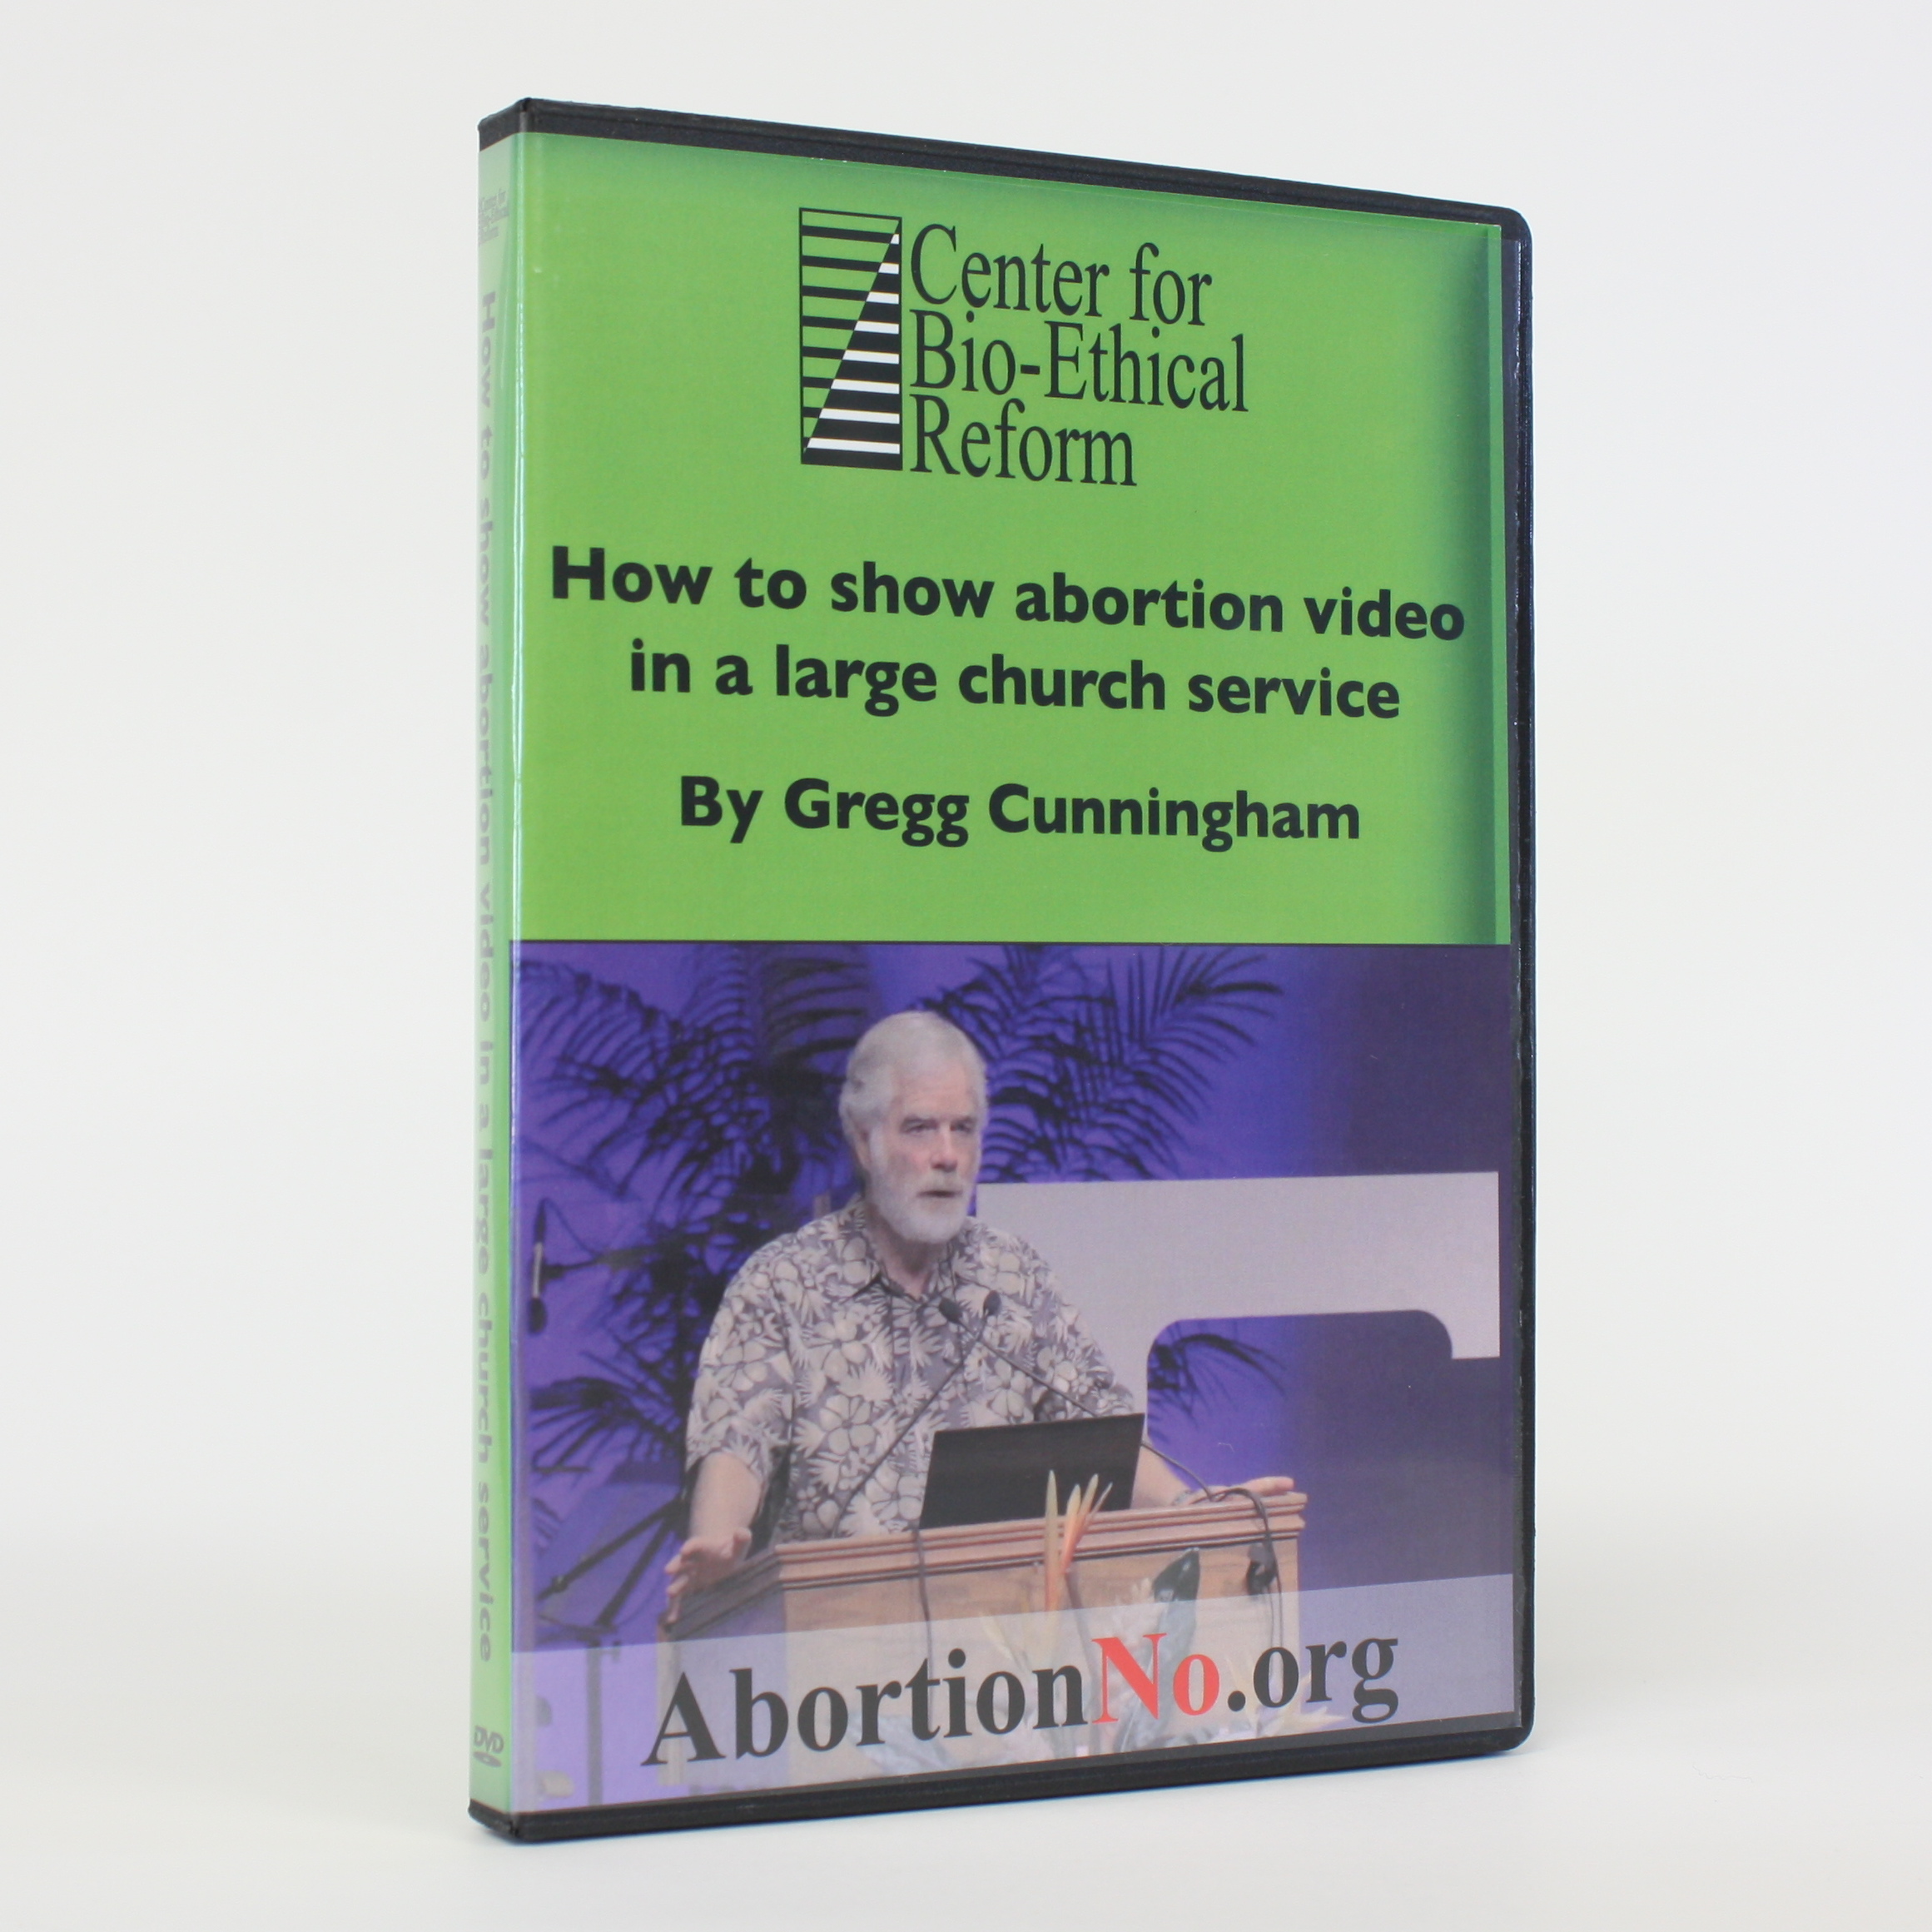 How to Show Abortion Video in a Large Church Service